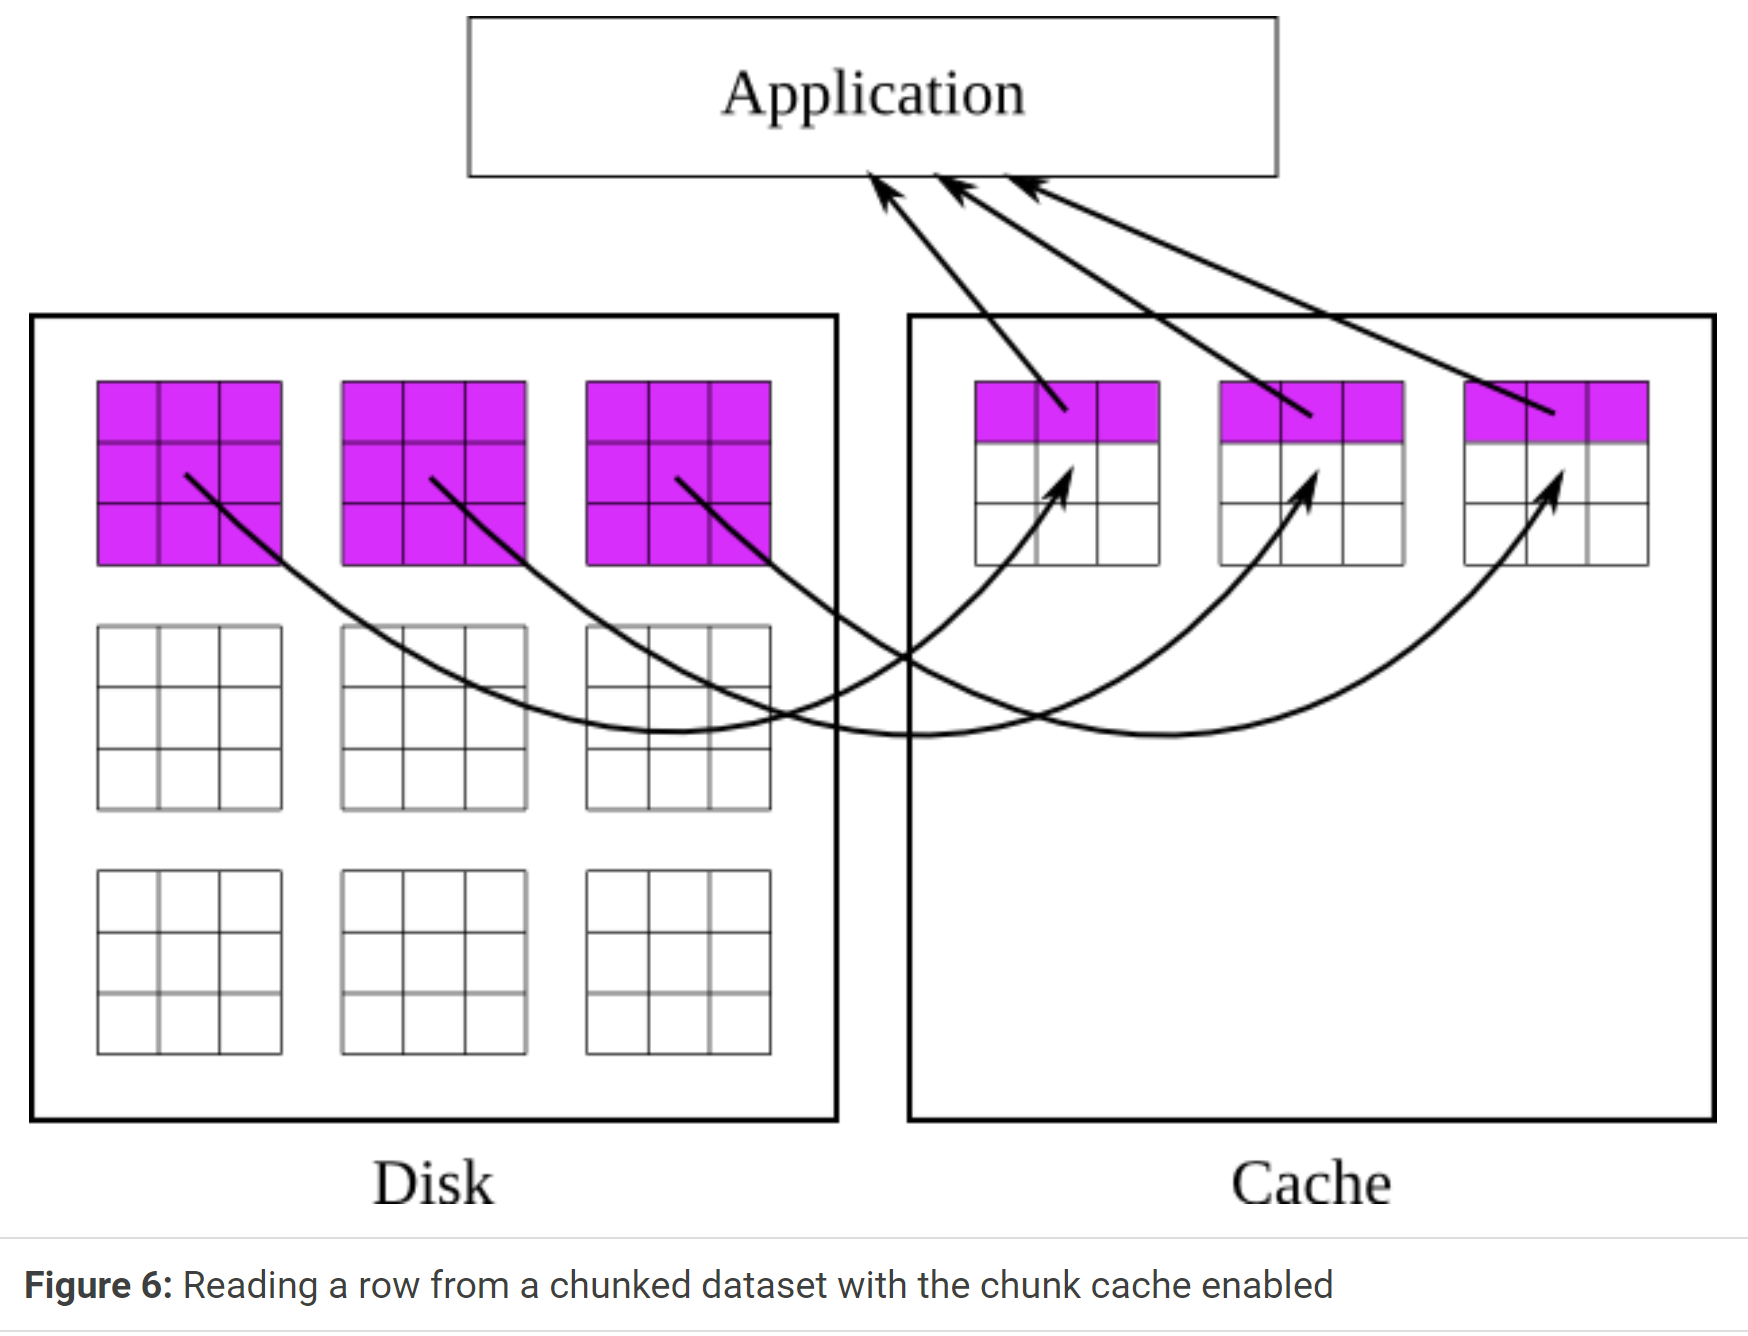 Reading a row from a chunked dataset with the chunk cache enabled